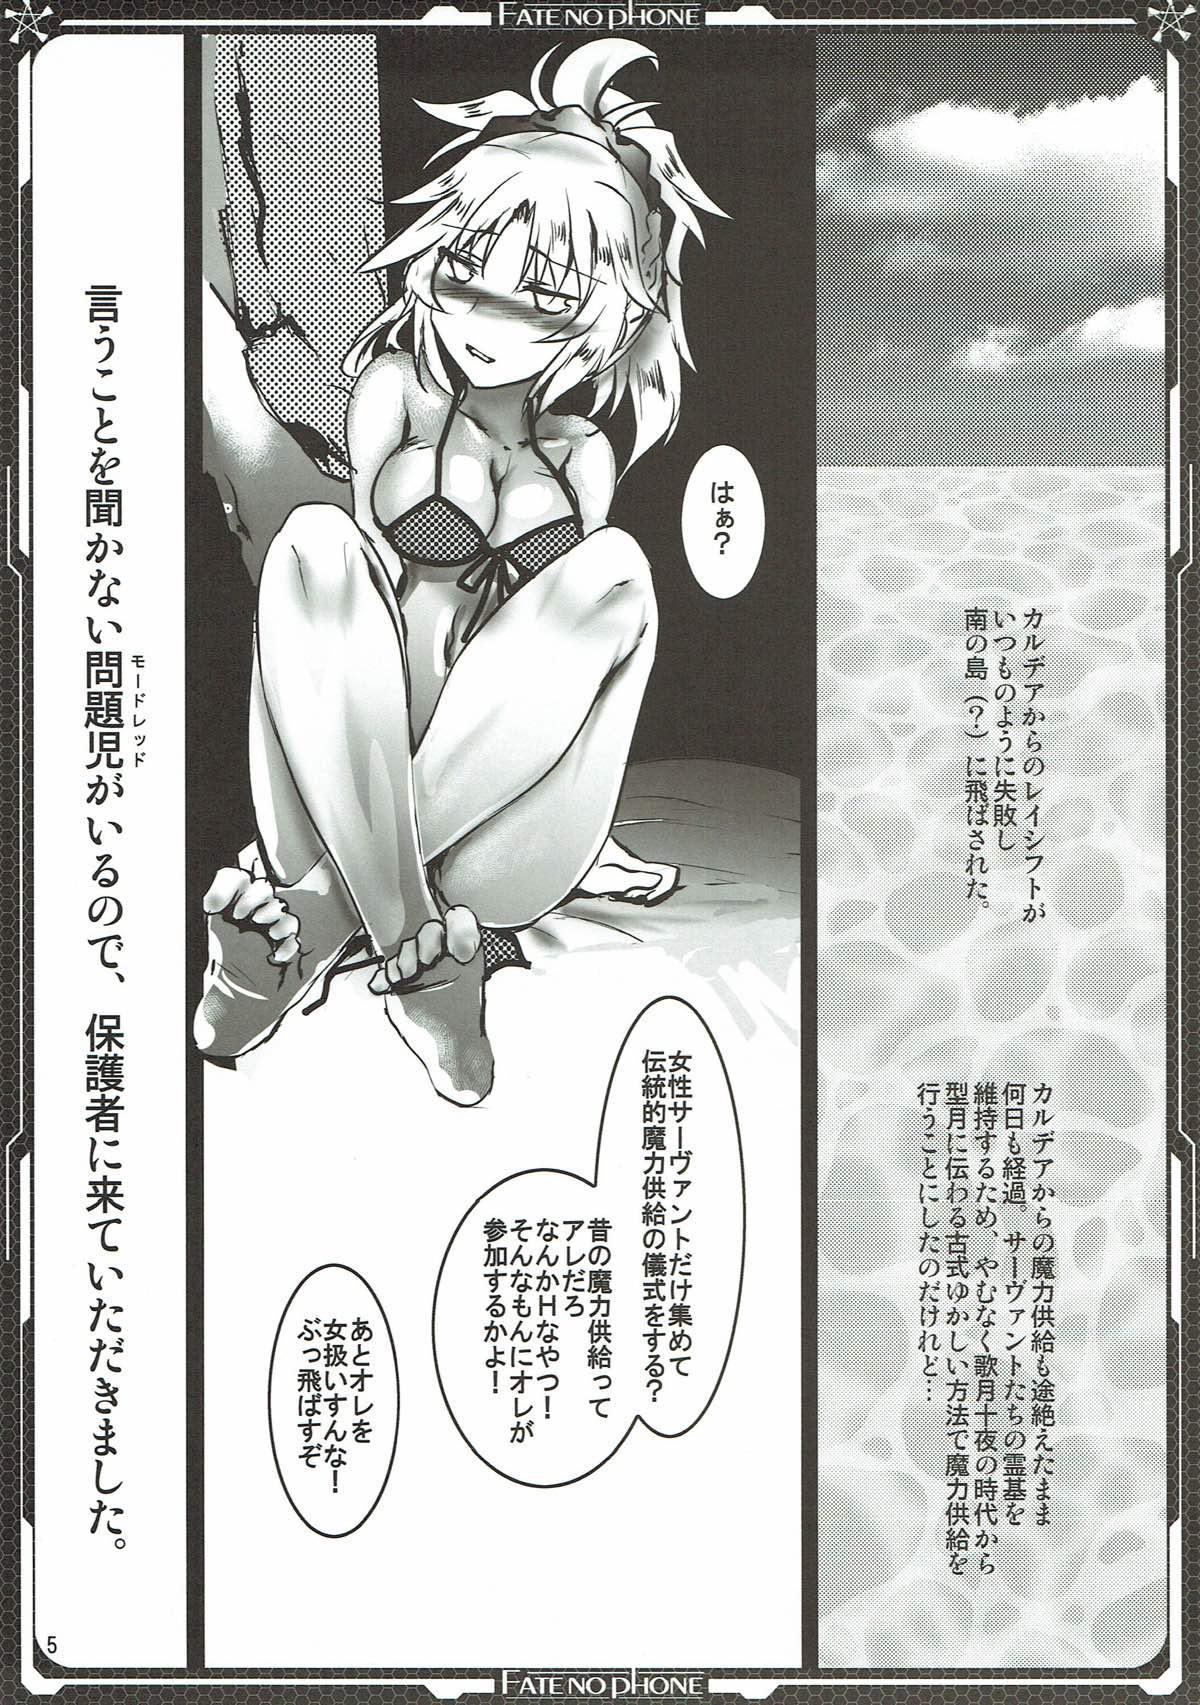 Groupsex Mode:/Red - Fate grand order Interracial Hardcore - Page 3